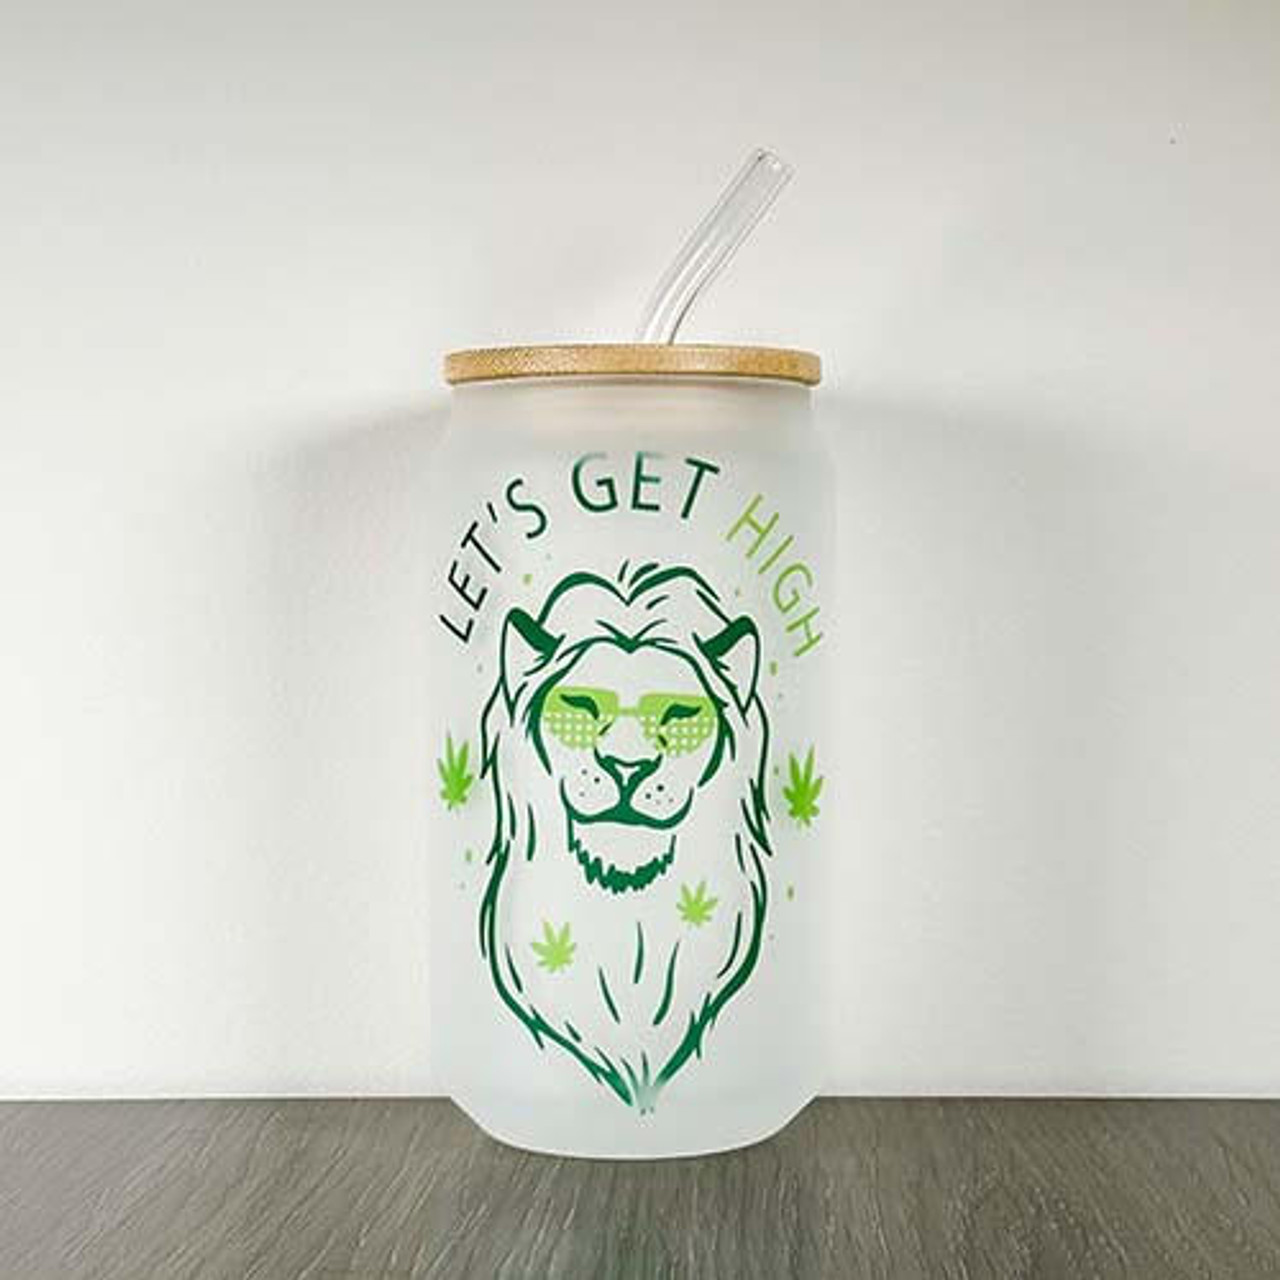 Three 16 oz Frosted Glass Cans Sublimation Mockup